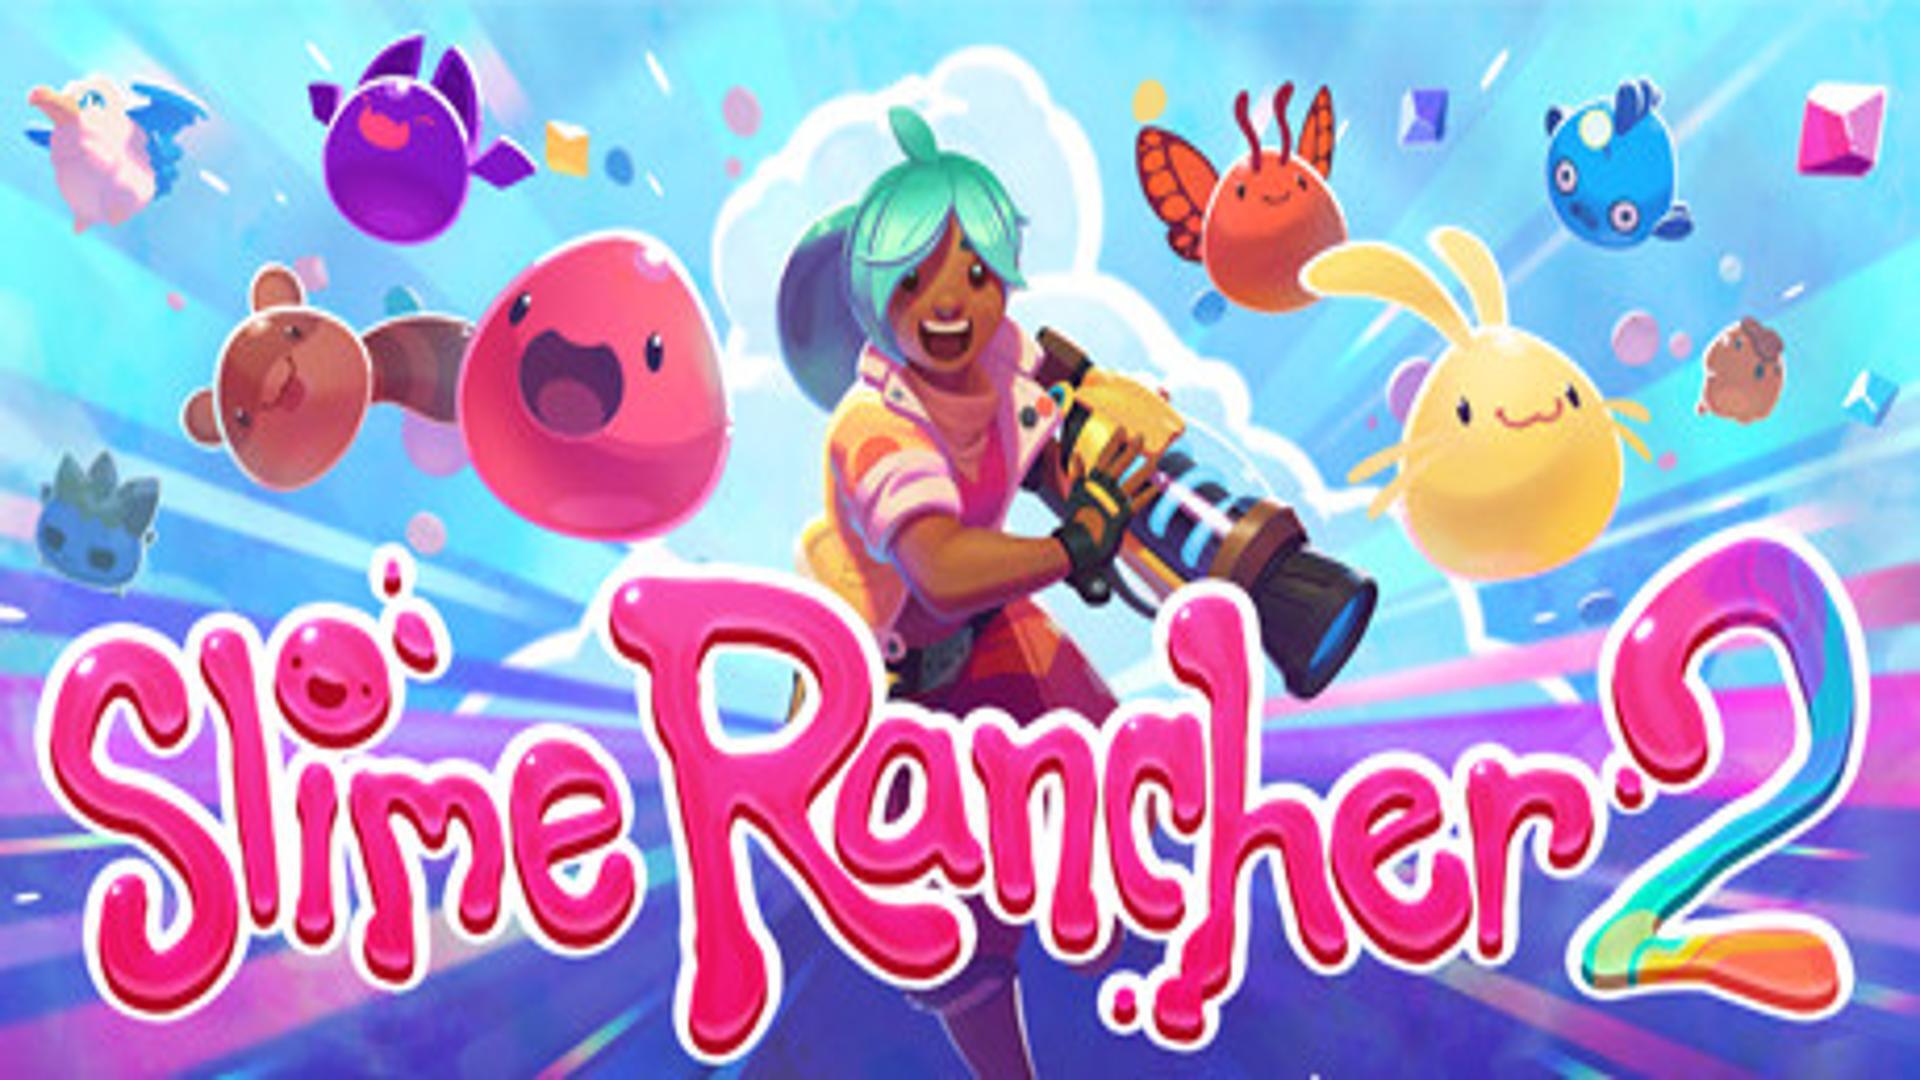 Slime rancher 2 – Free Download (Build 10904066)